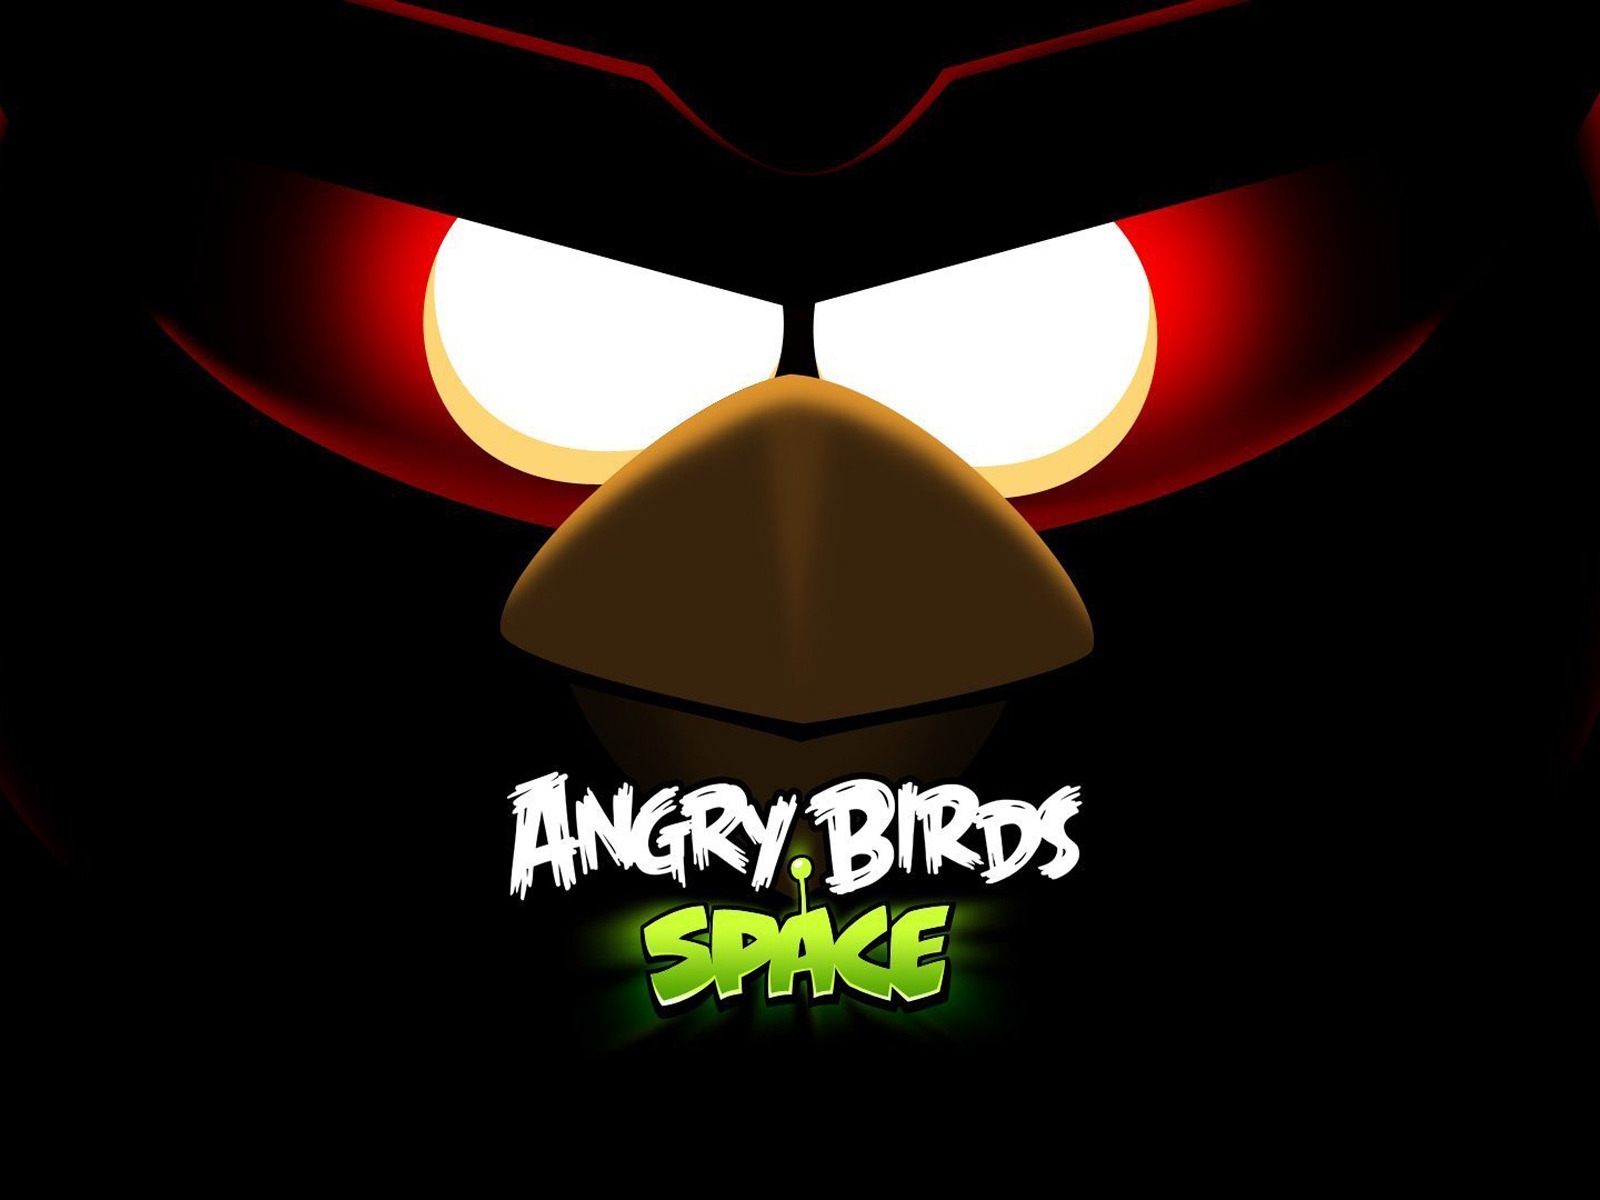 Angry Birds Space for 1600 x 1200 resolution